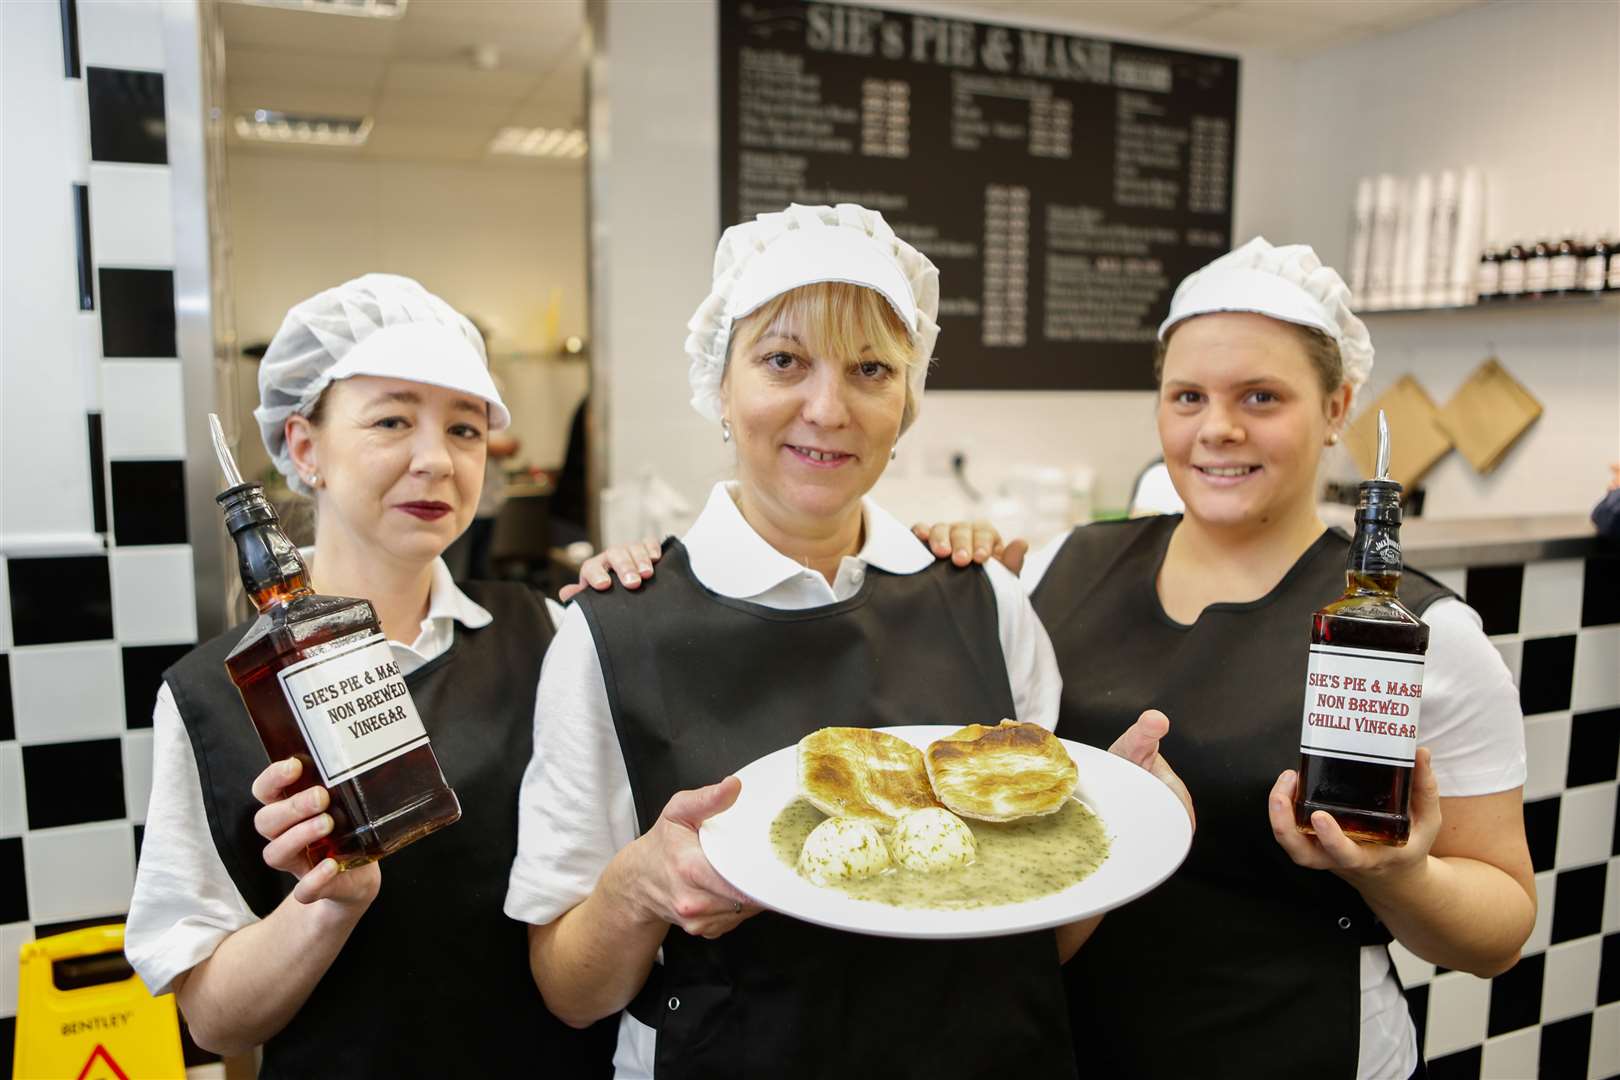 From the left Victoria Ford, Donna Maylam, and Bianca Maylam at Sie's Pie and Mash shop